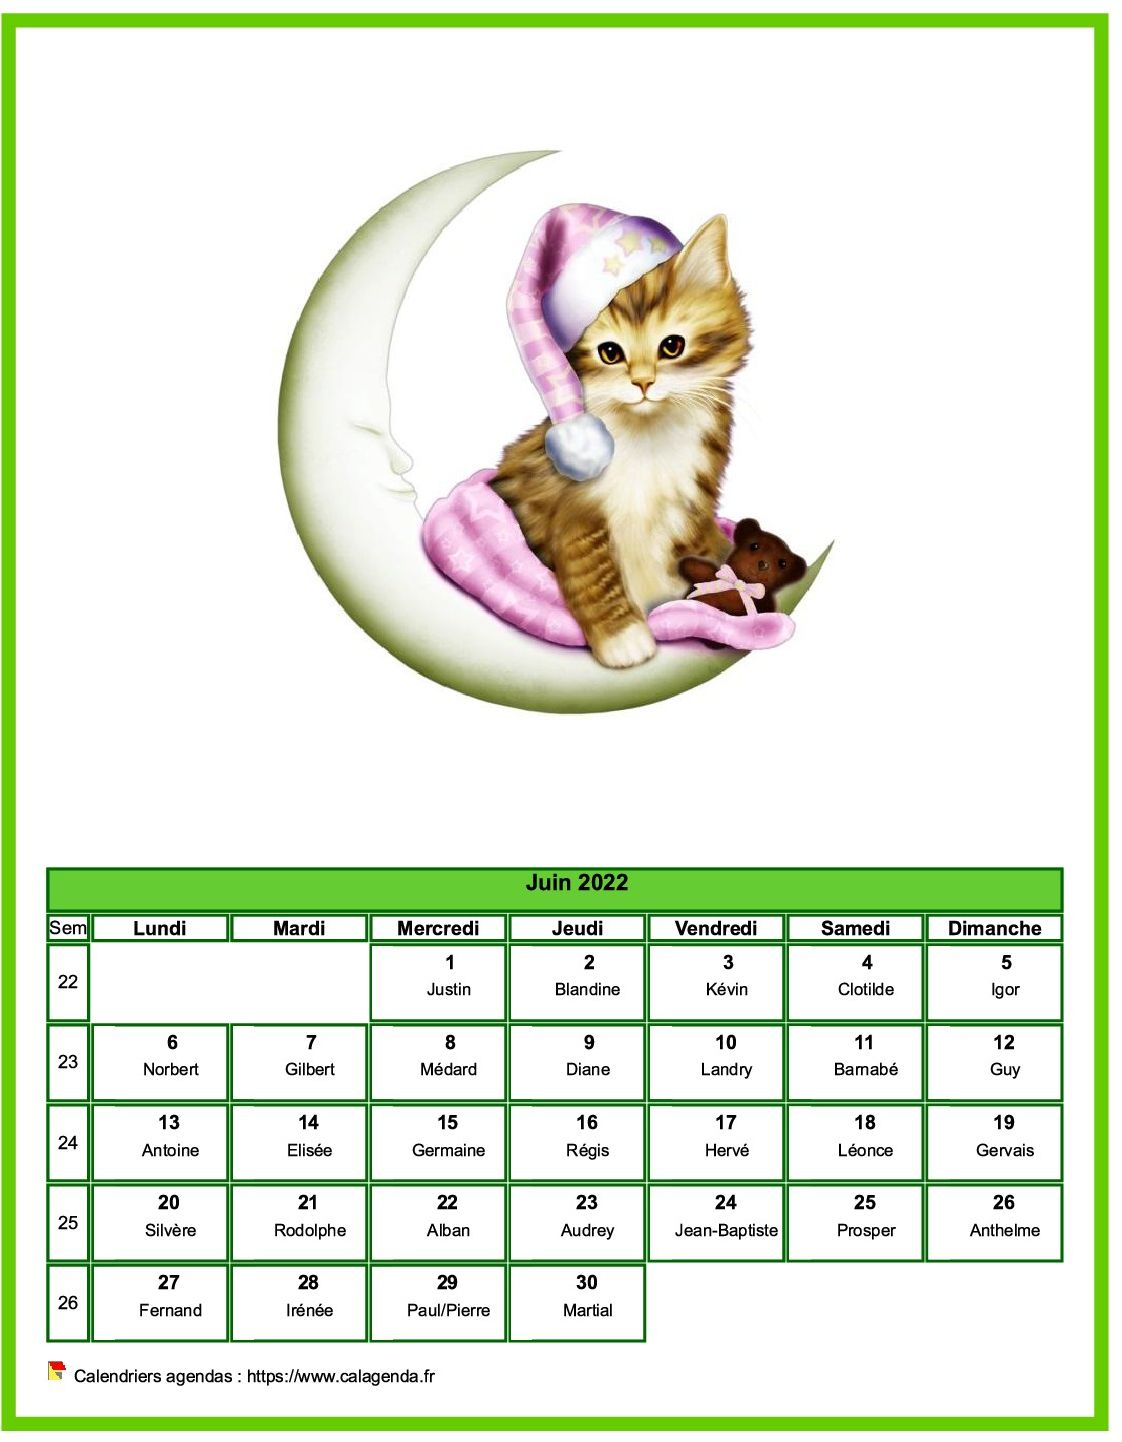 Calendrier juin 2022 chats